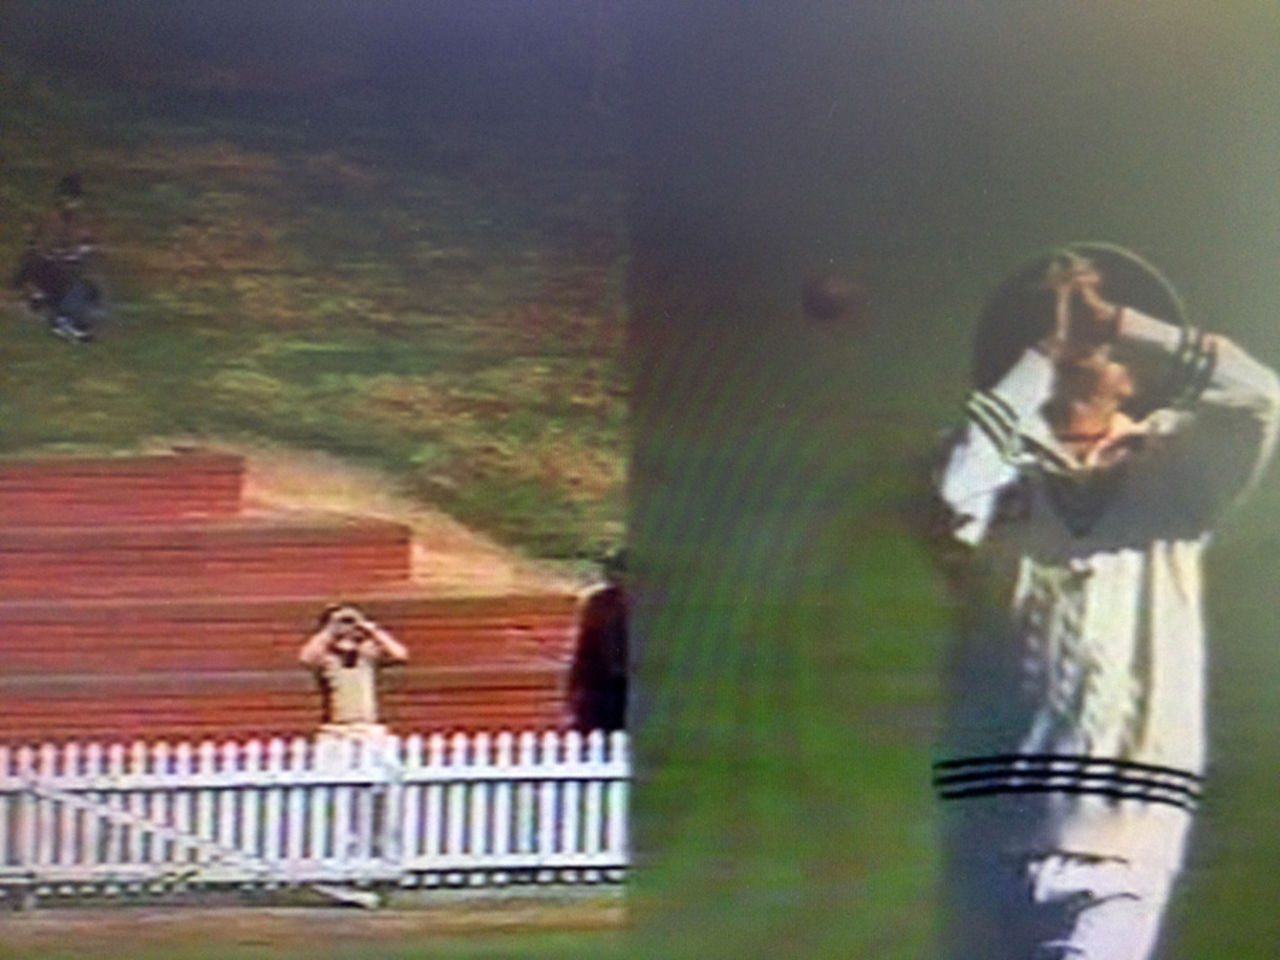 A split screen shows a spectator taking a catch (on the left) and Chris Martin dropping one (on the right), New Zealand v Zimbabwe, Only Test, Wellington, 5th day, December 30, 2000